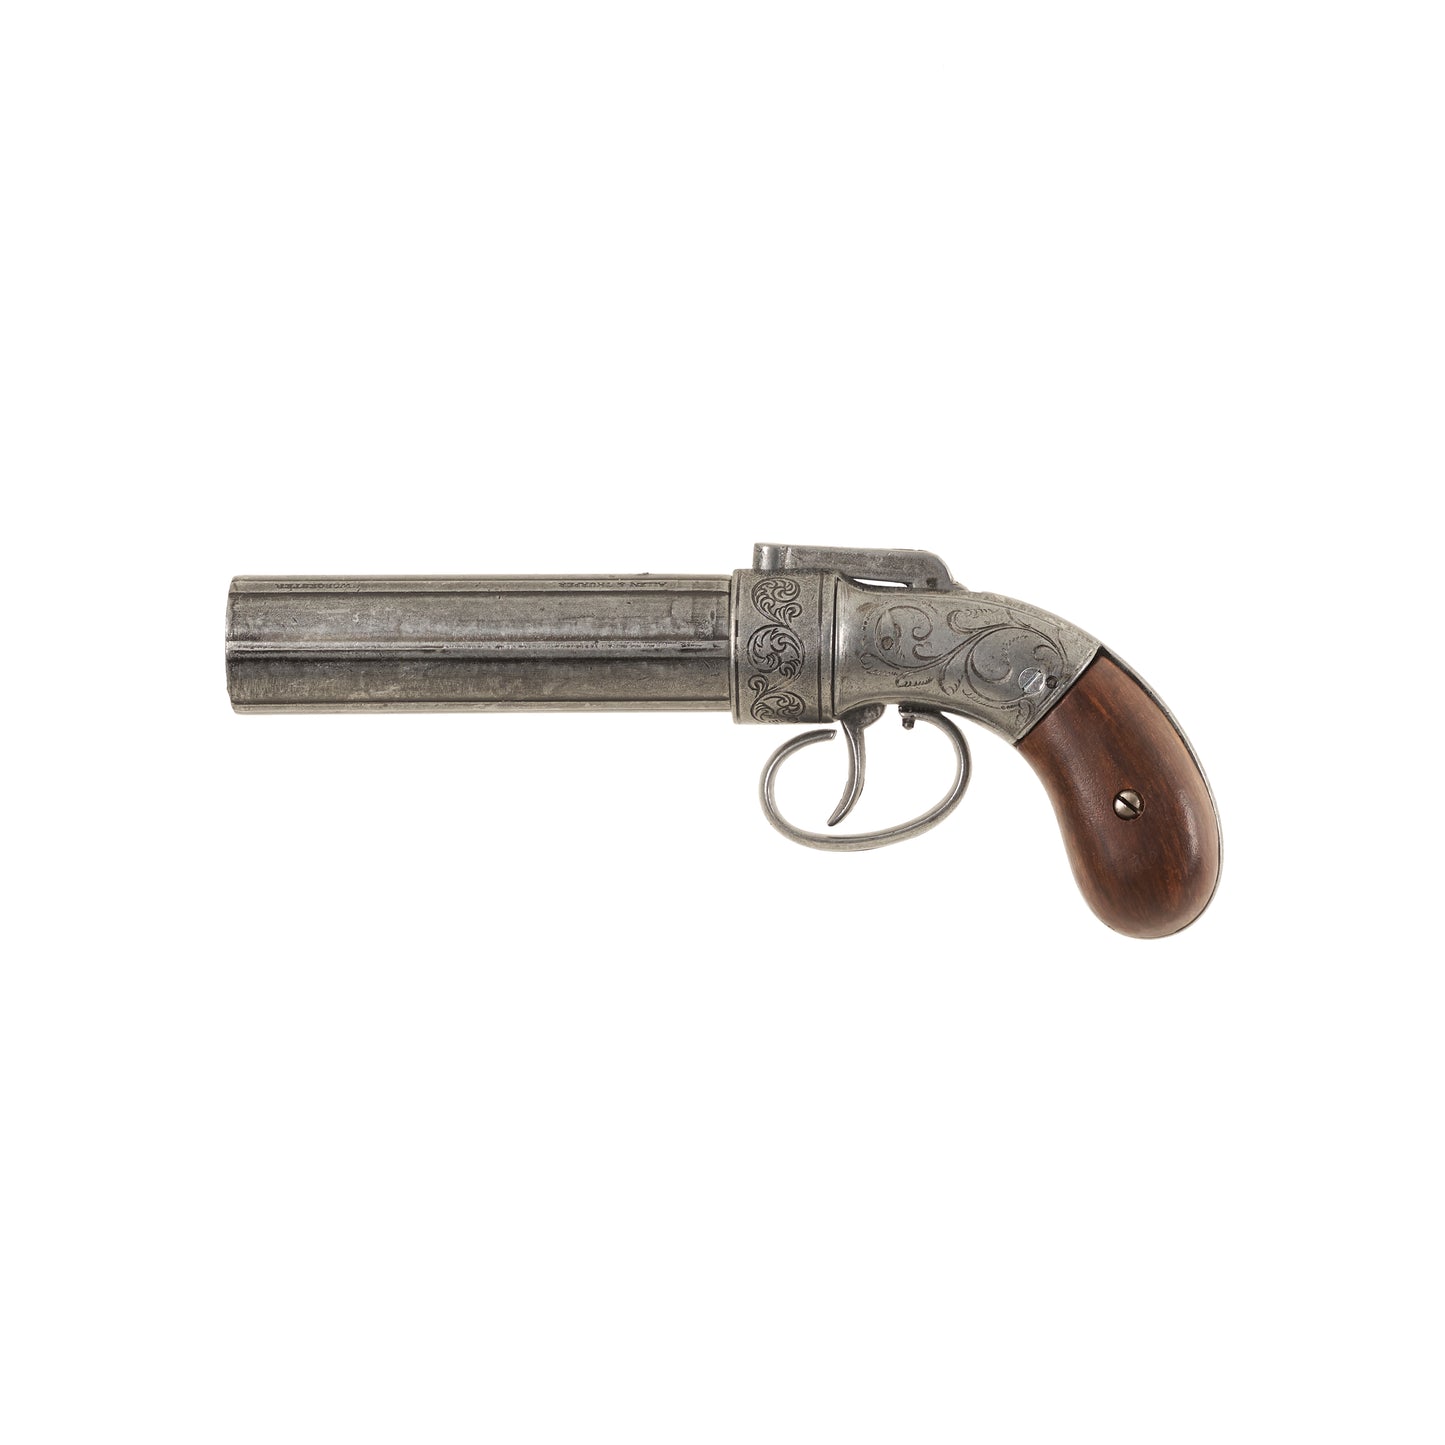 Left side view of Non-Firing Replica 1837 Pepperbox Revolver with scrollwork adorning the metal and a wooden grip.